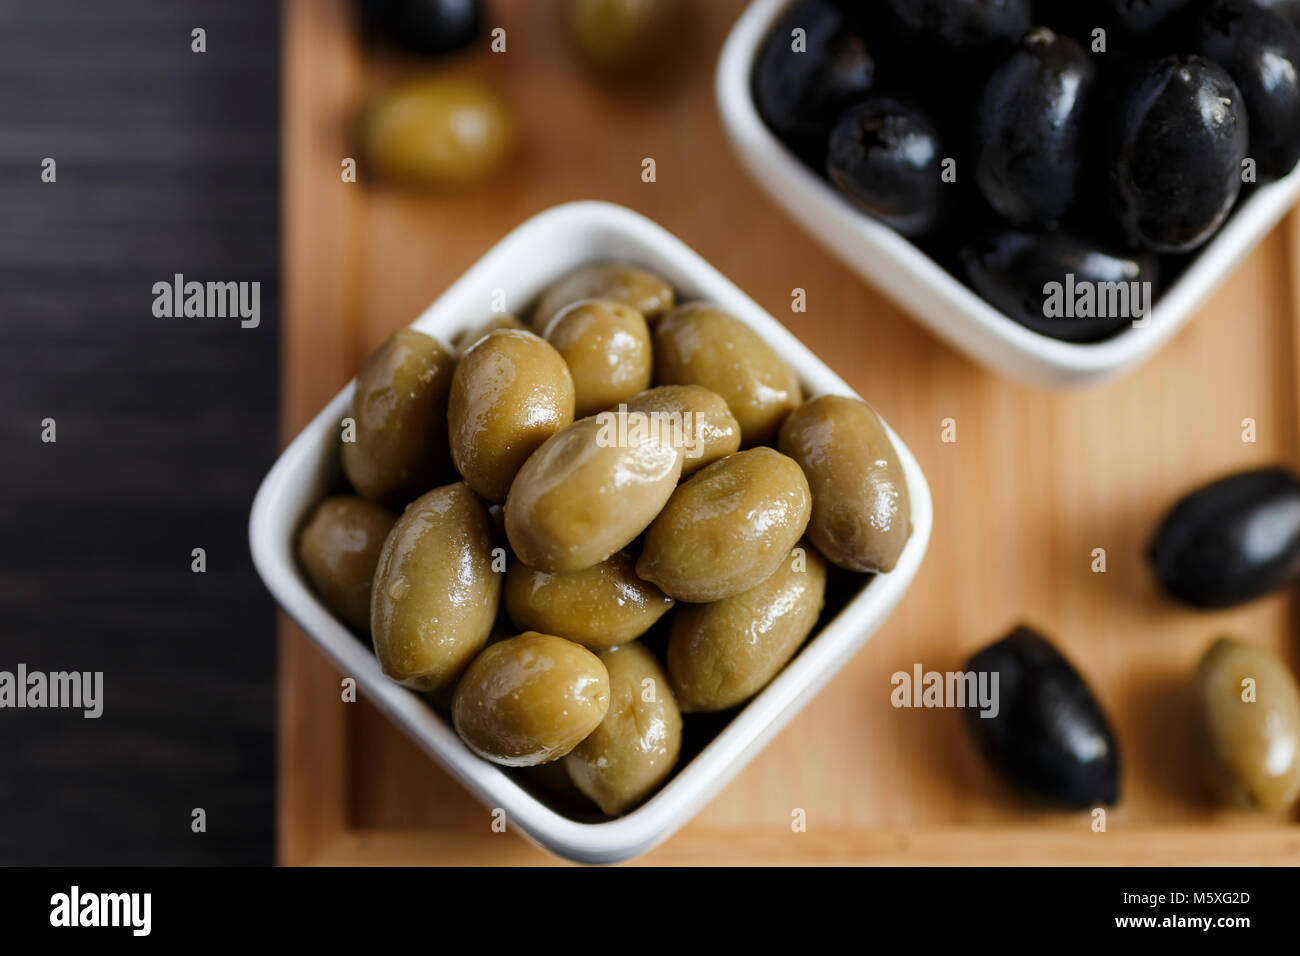 Black and green olives in a white bowl on a dark wooden table. Stock Photo